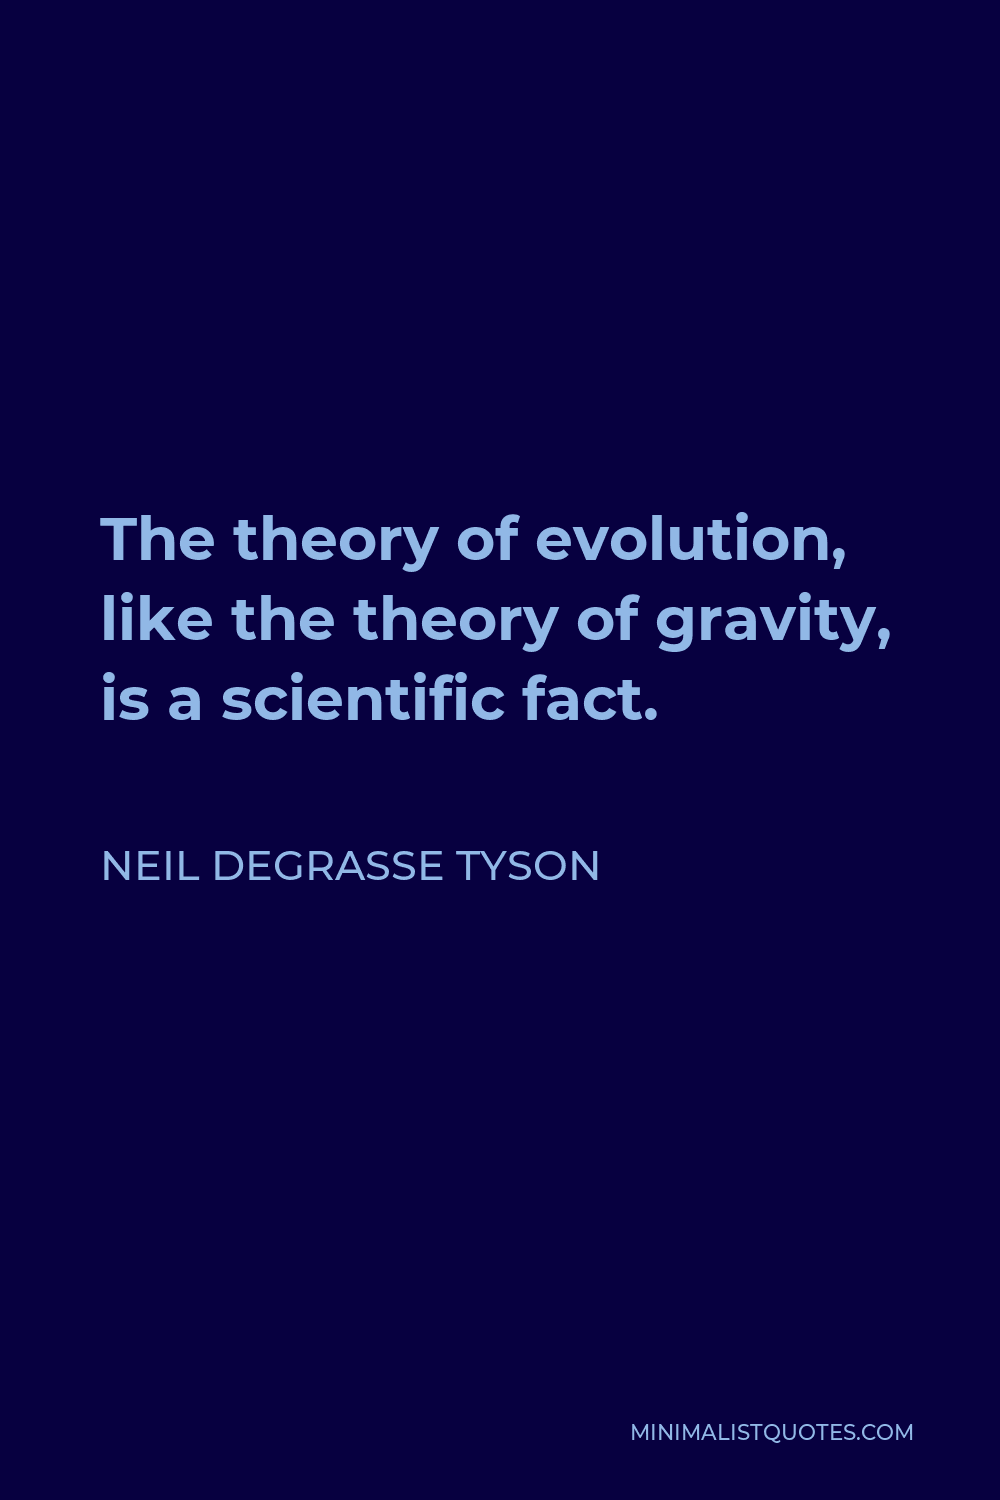 Neil deGrasse Tyson Quote - The theory of evolution, like the theory of gravity, is a scientific fact.